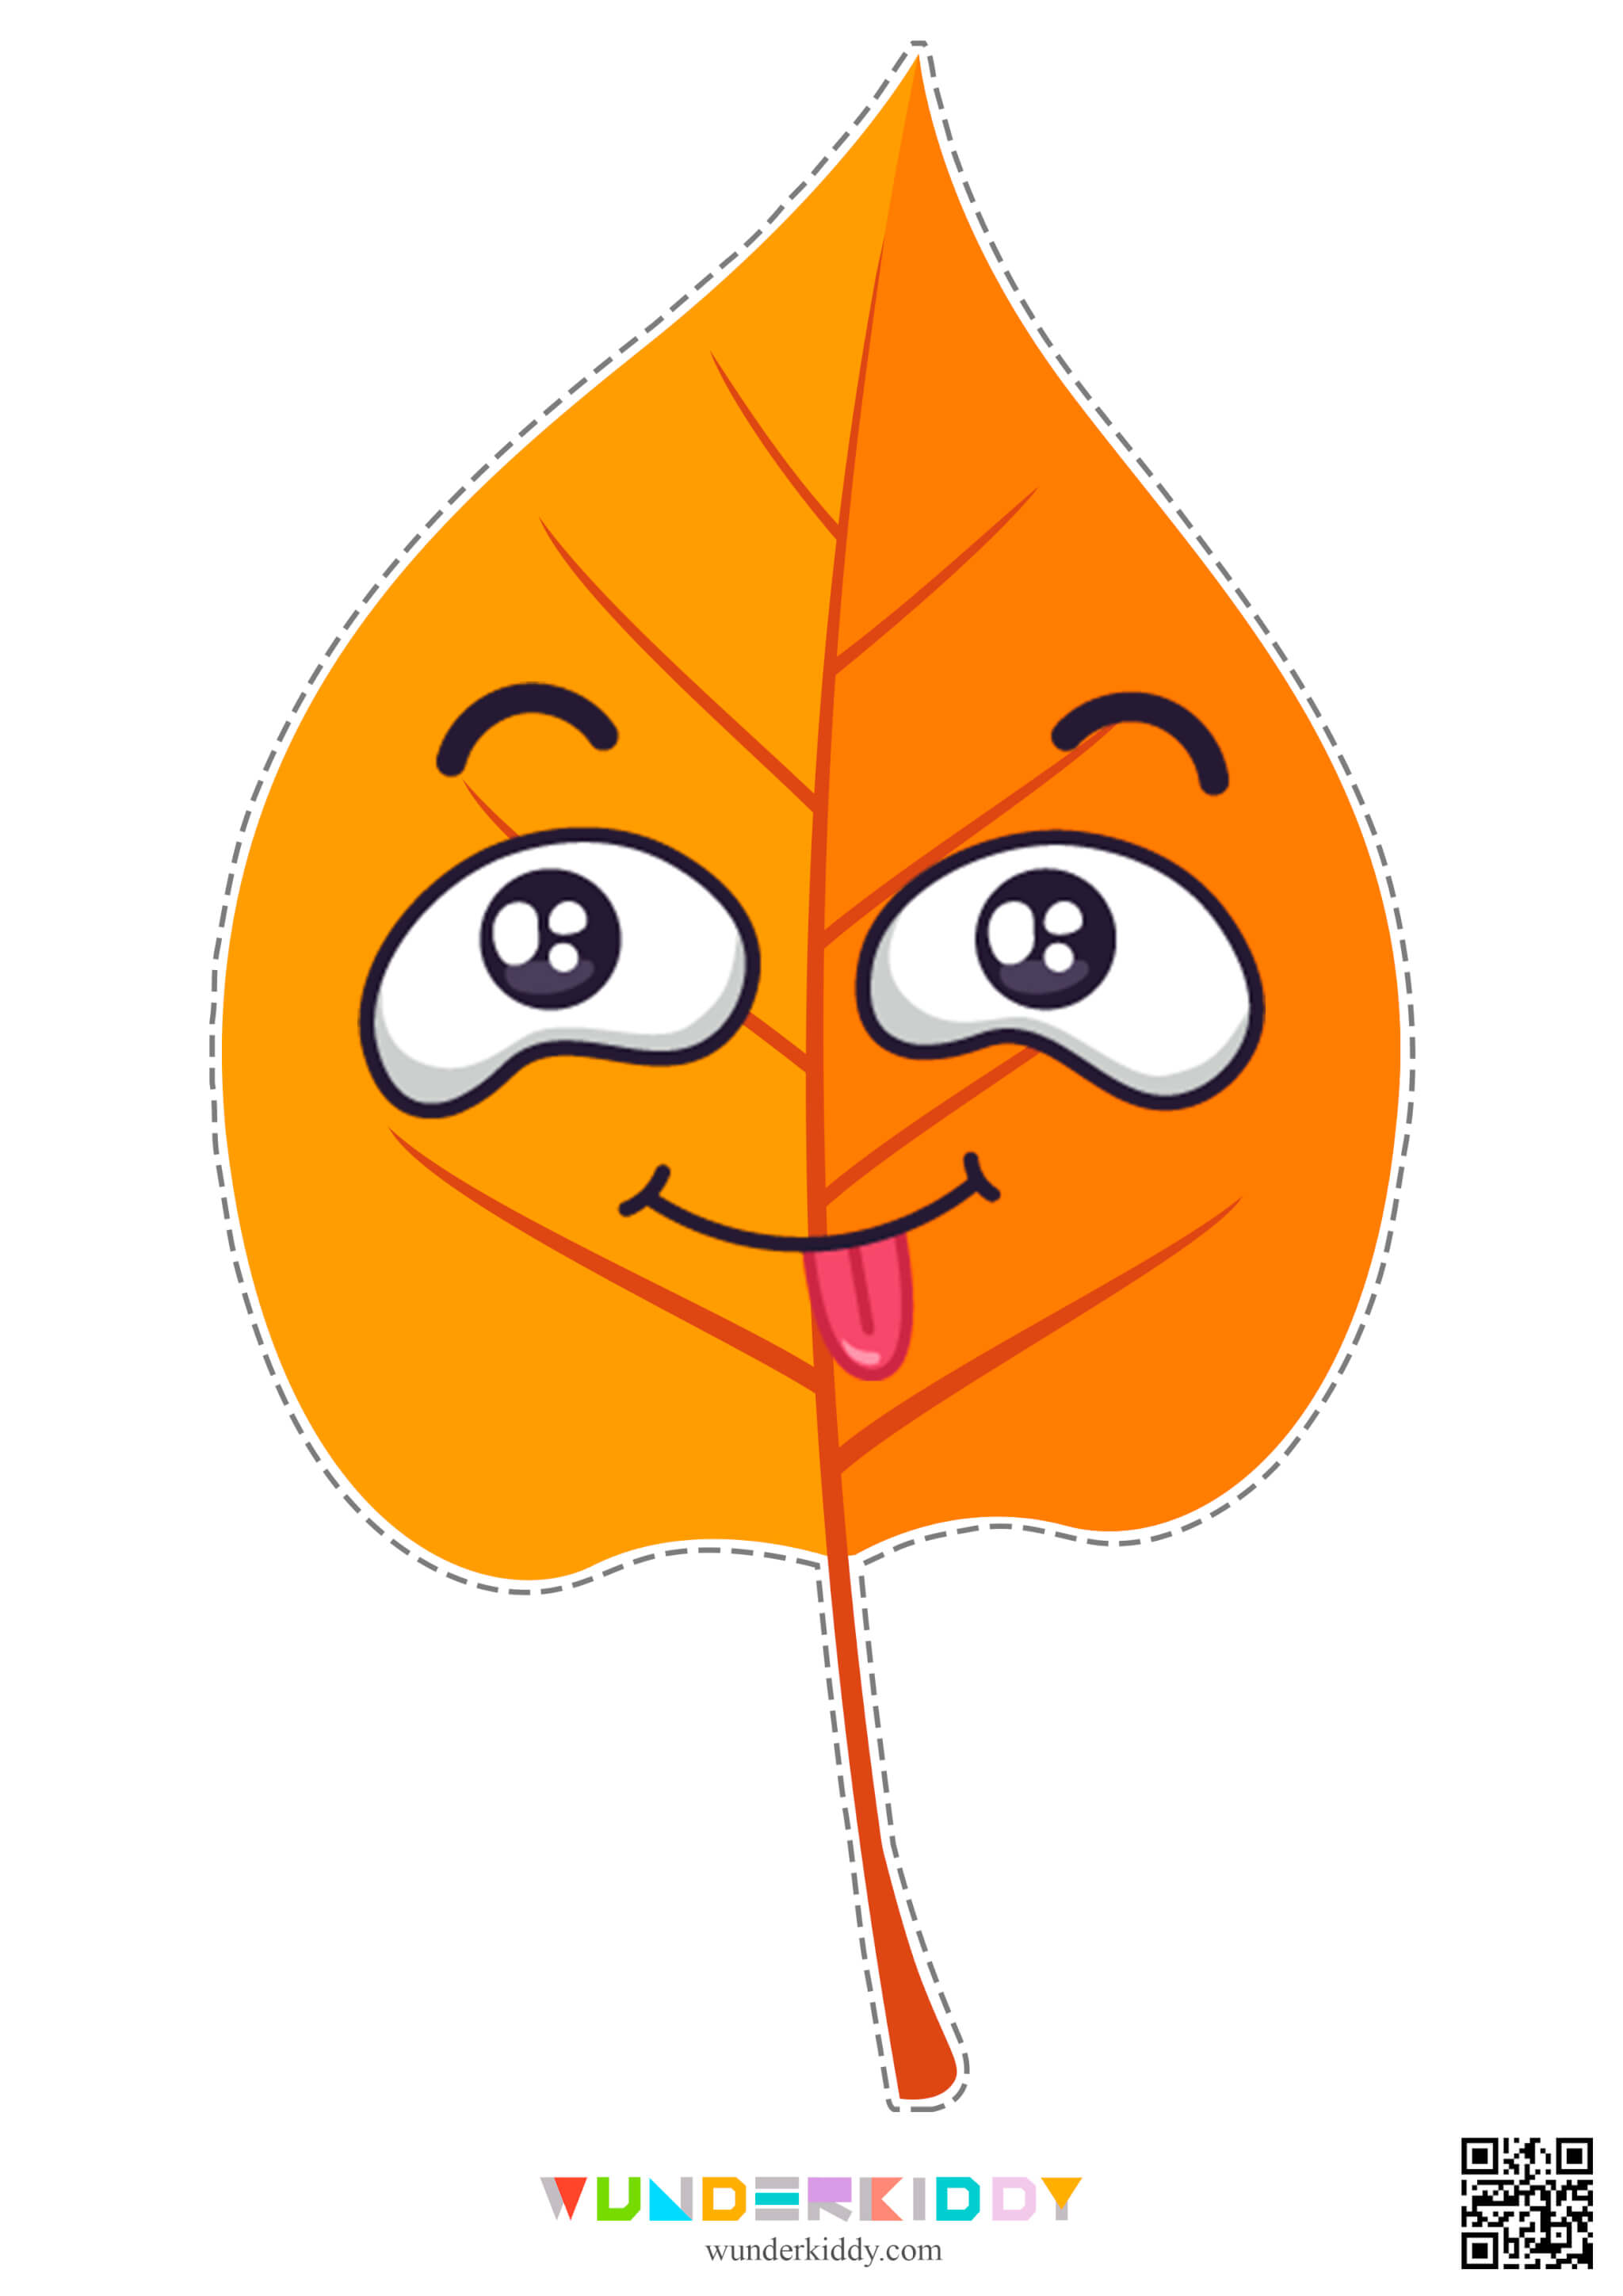 Activity sheet «Funny autumn leaves» - Image 7